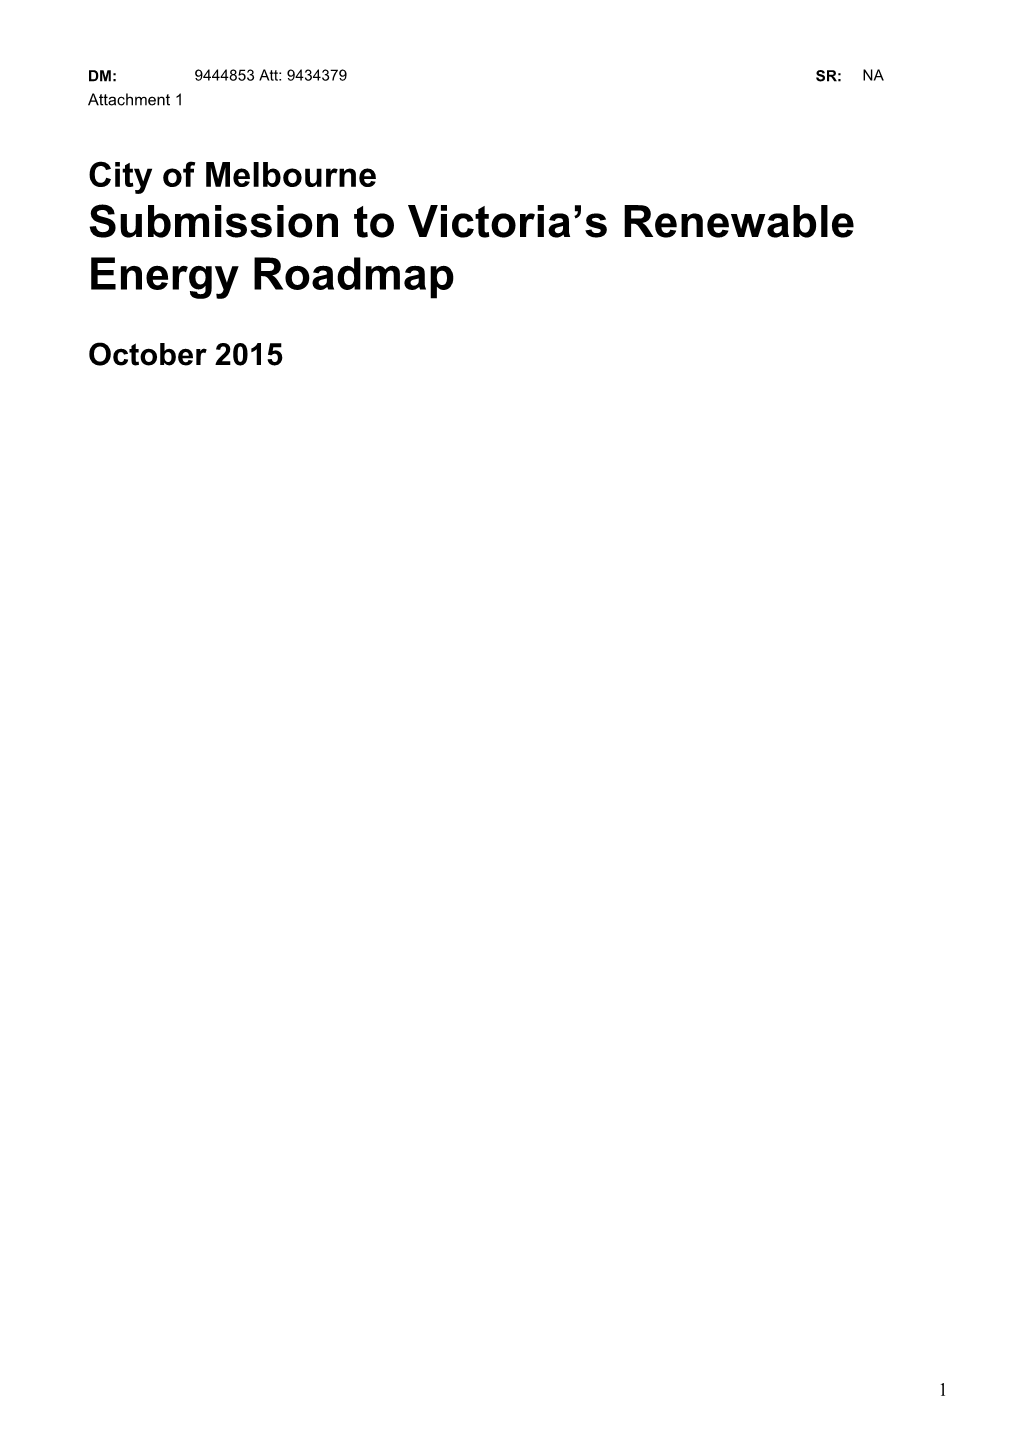 Submission to Victoria's Renewable Energy Roadmap